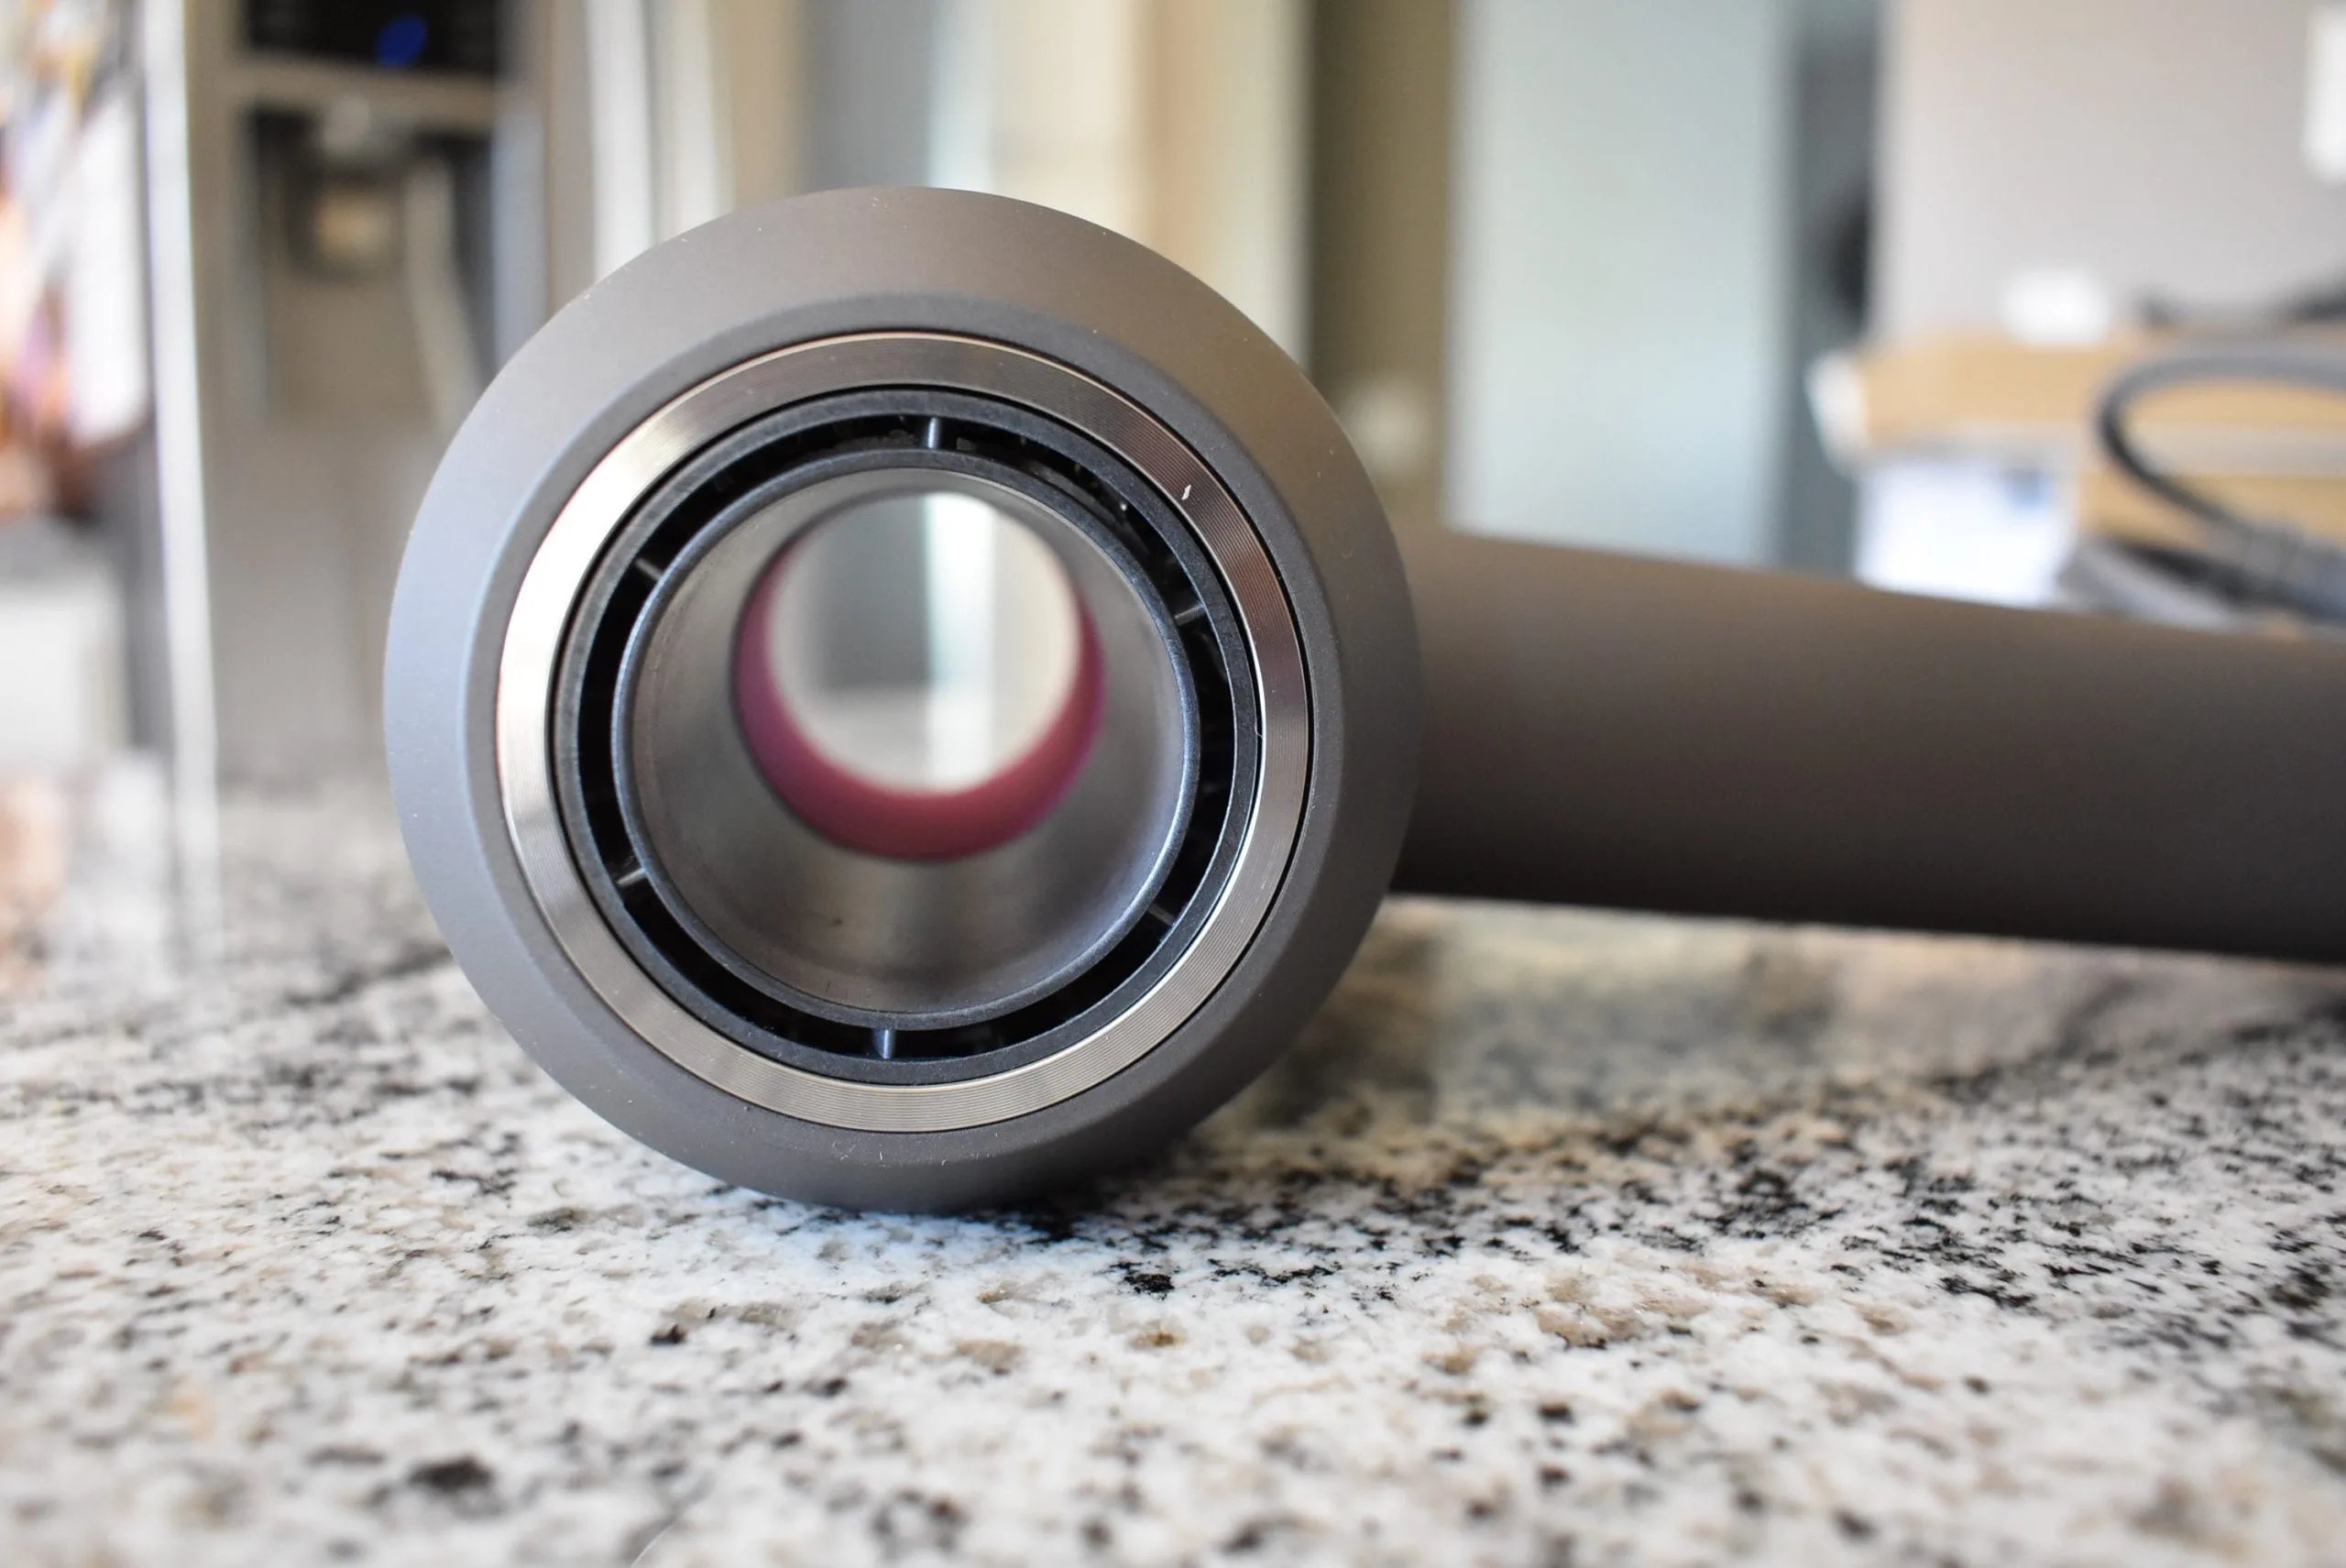 Front of the Dyson Hair Dryer showing a close-up of the magnet